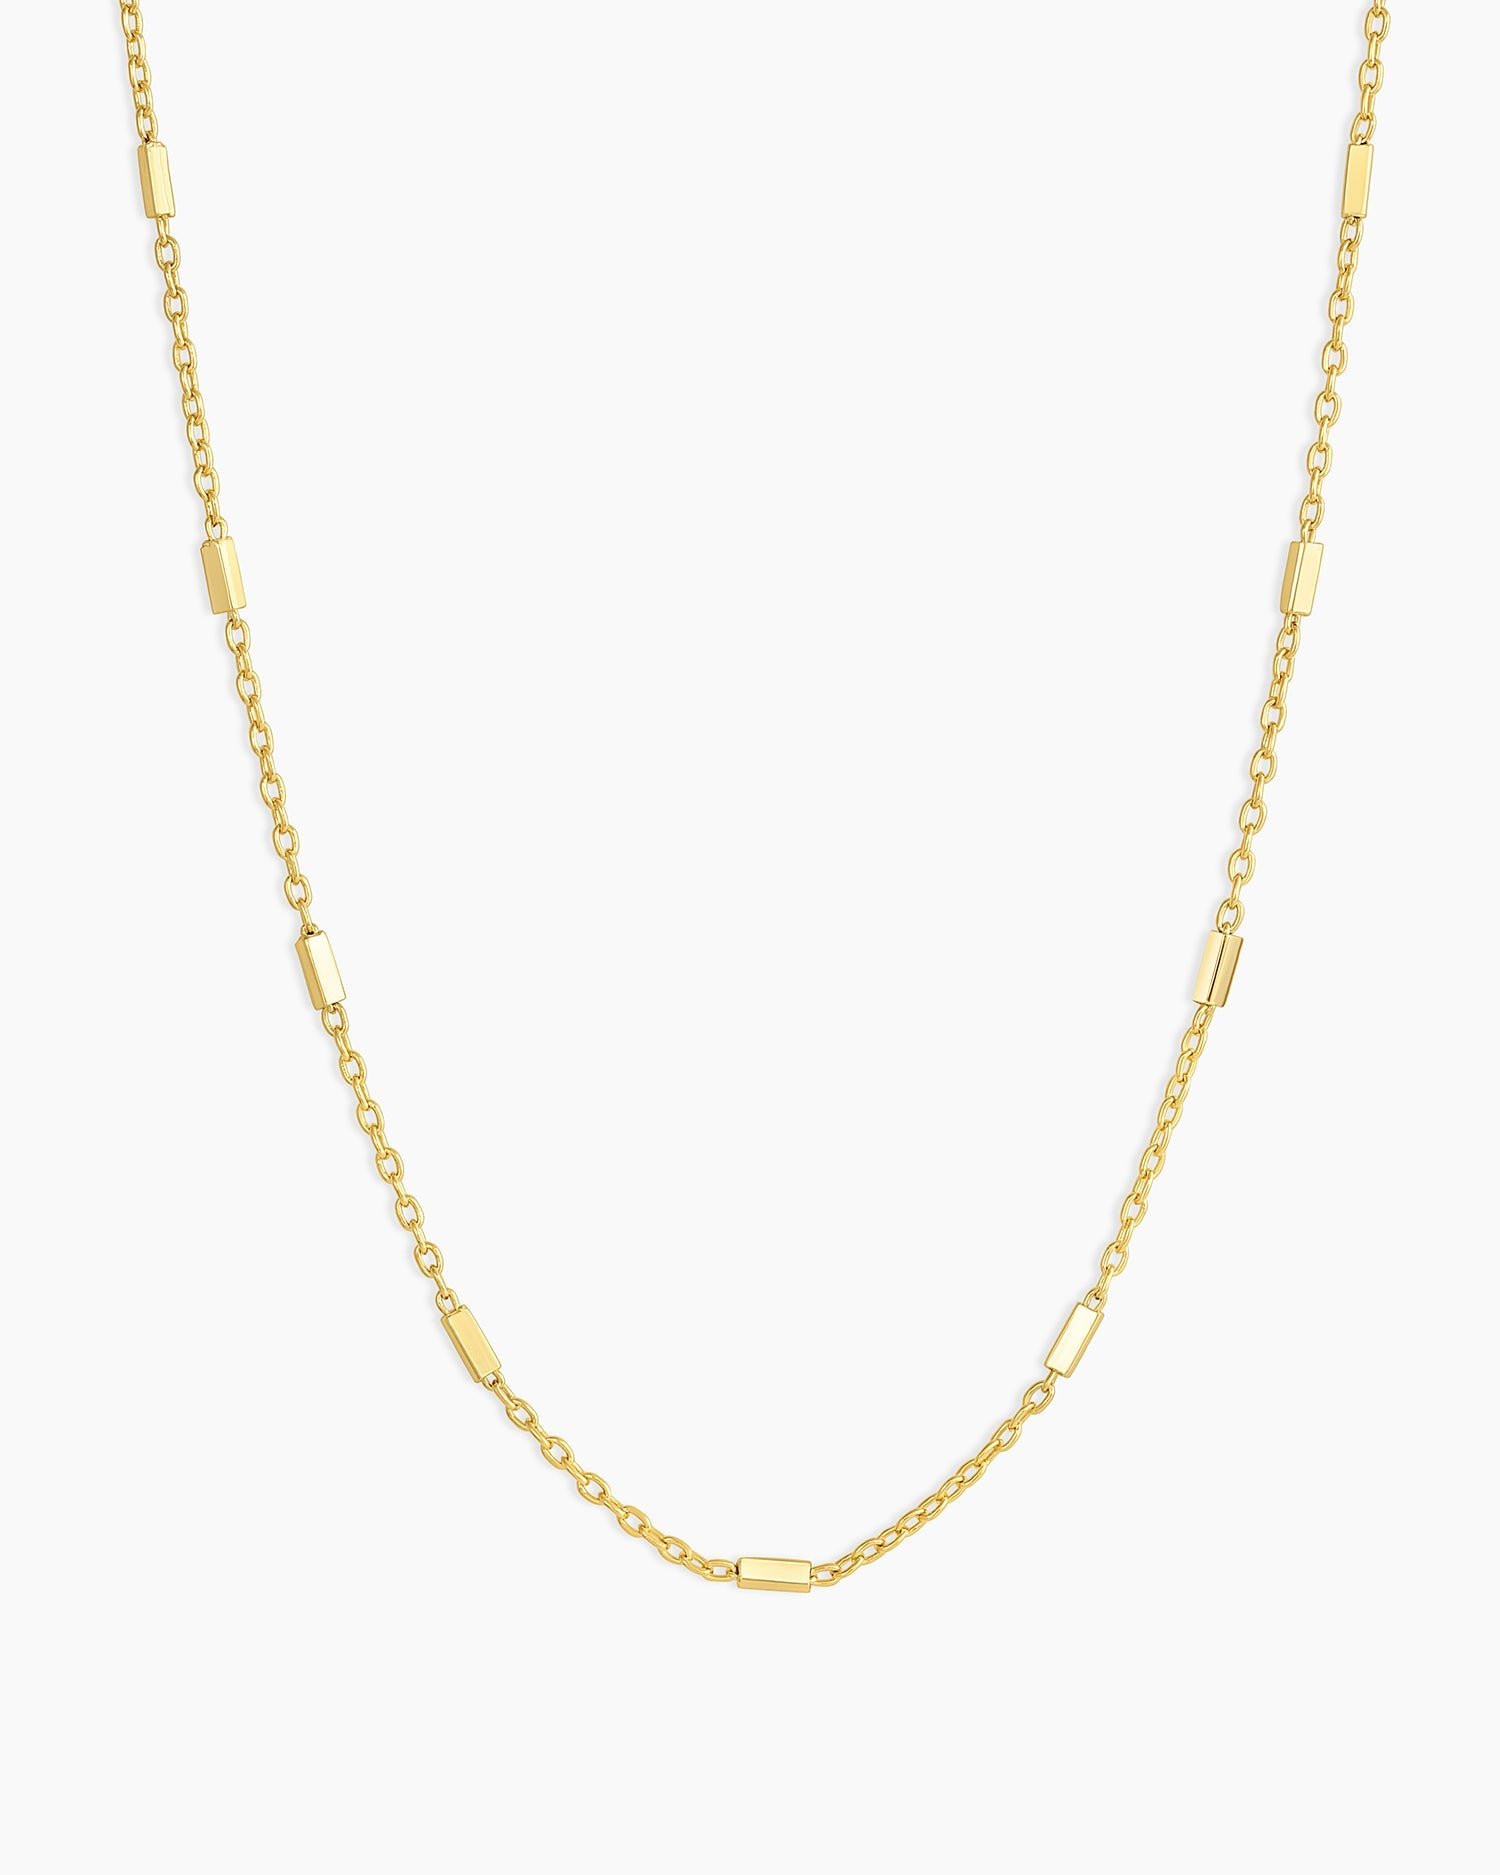 Tatum Necklace Textured chain necklace || option::Gold Plated